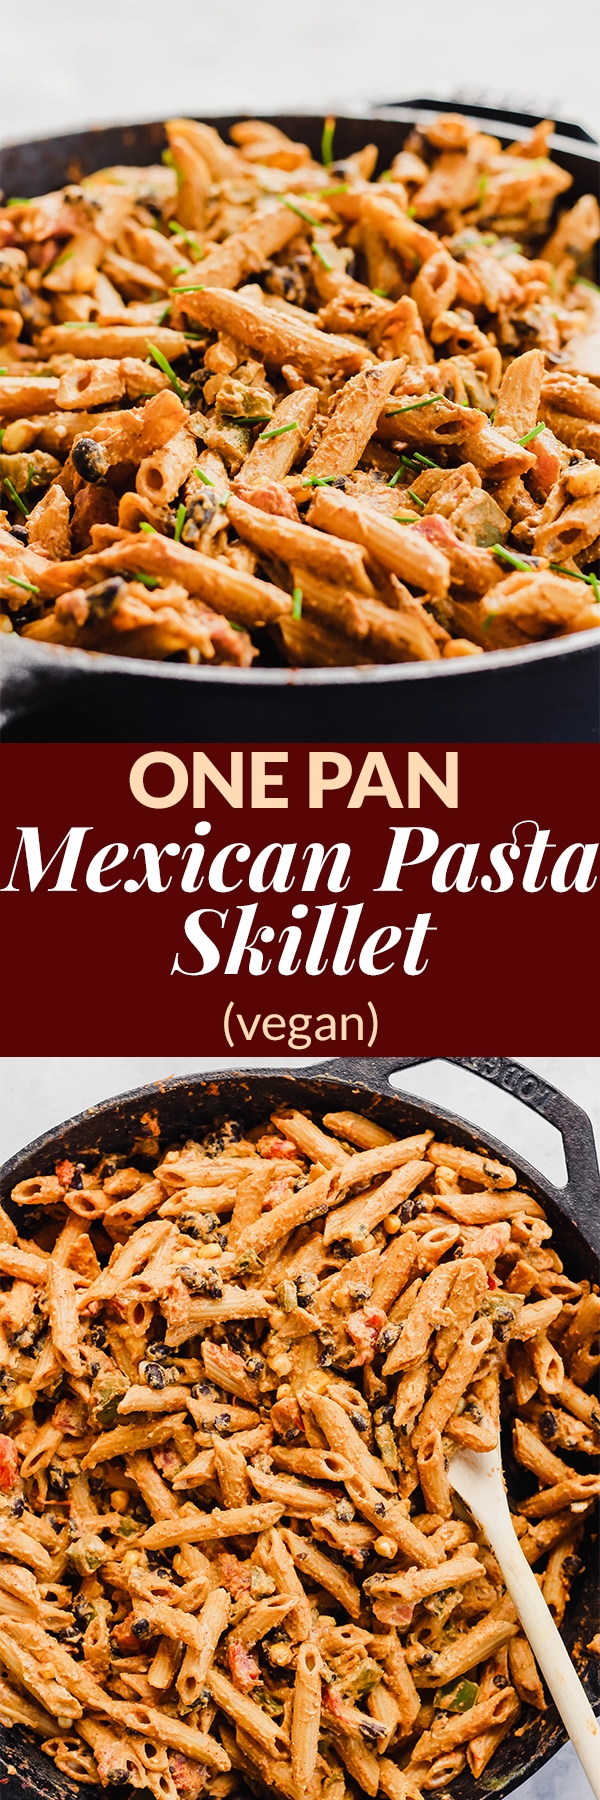 Dinner is served in 30 minutes with this One Pan Mexican Pasta Skillet with a dairy-free chipotle yogurt sauce! It’s insanely satisfying thanks to 16 grams of plant protein per serving. (vegan)